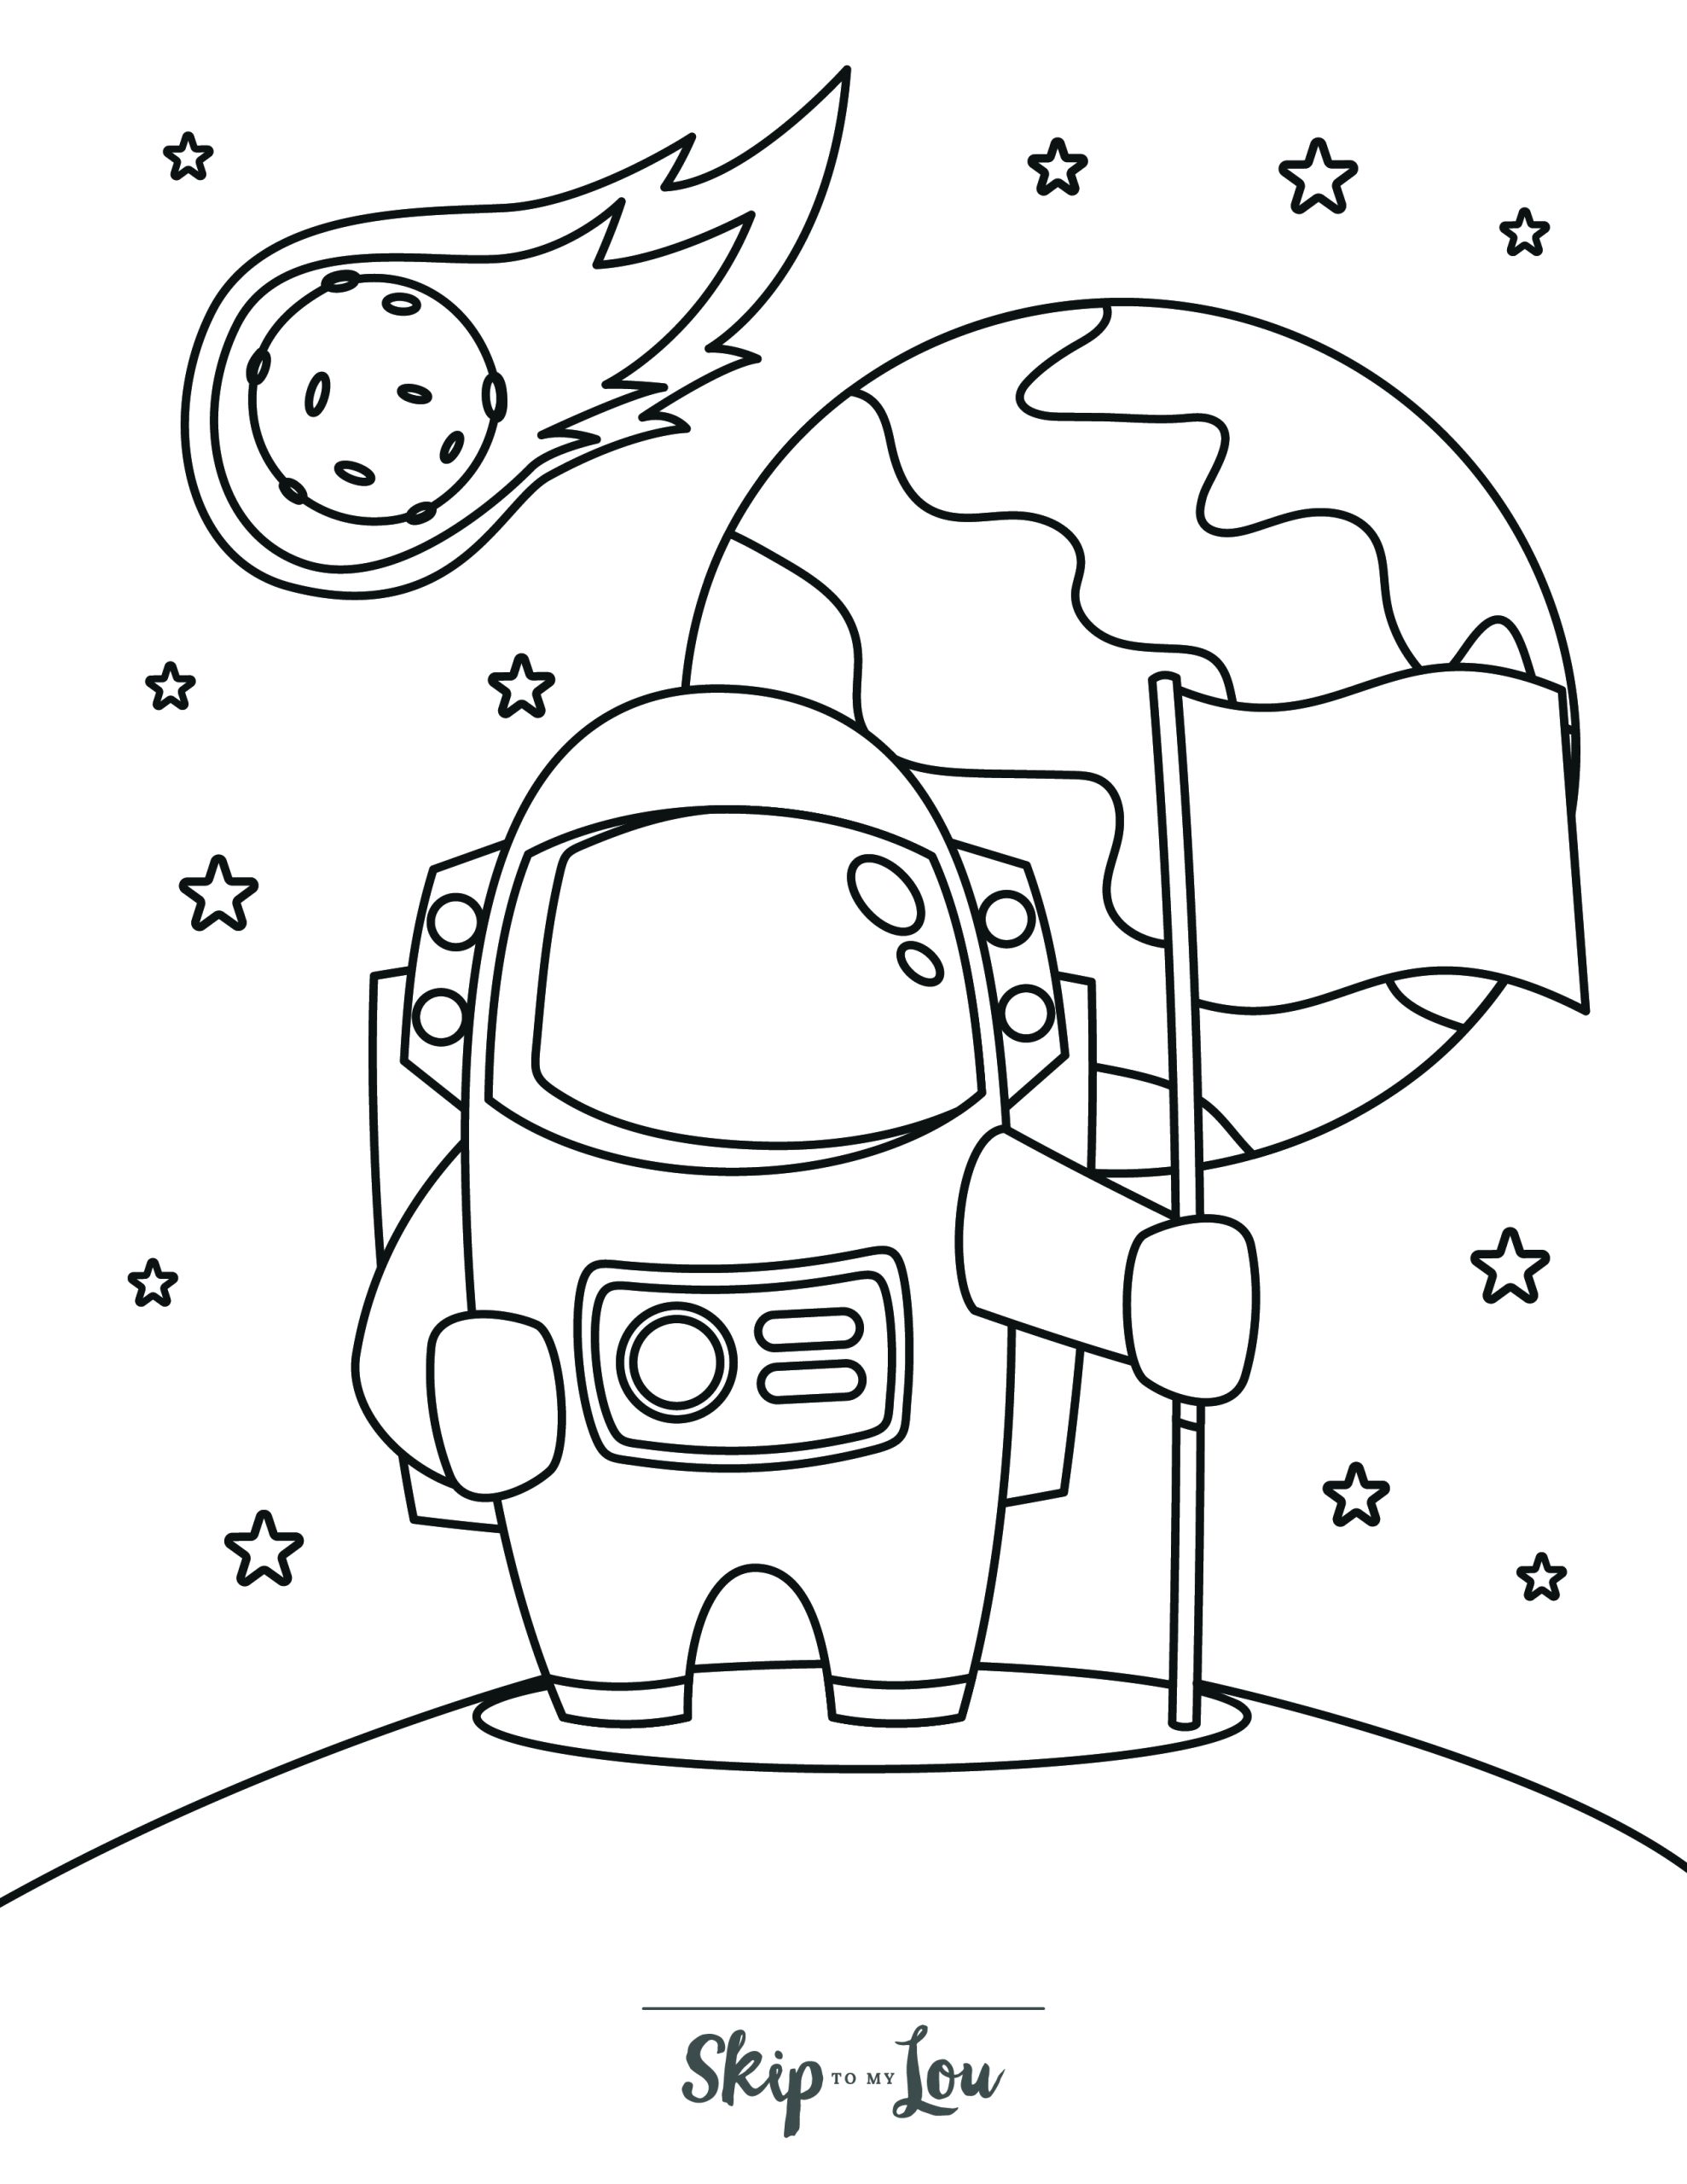 Space Coloring Page 9 - Astronaut planting flag on moon, with planet Earth in background